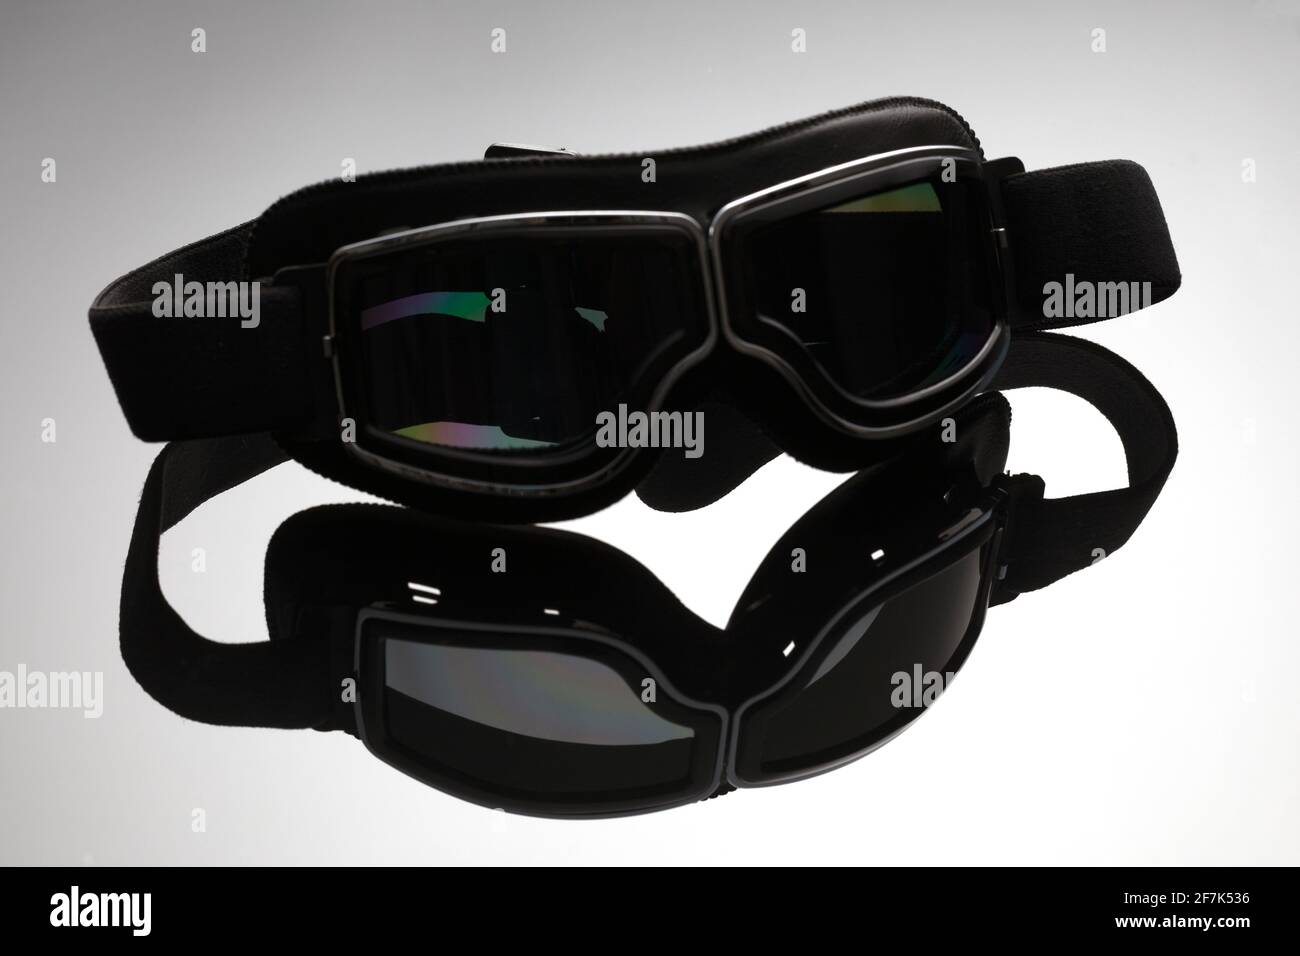 Close-up of black leather motorcycle rider's glasses with reflection on mirror surface. Eye protection wear. Stock Photo